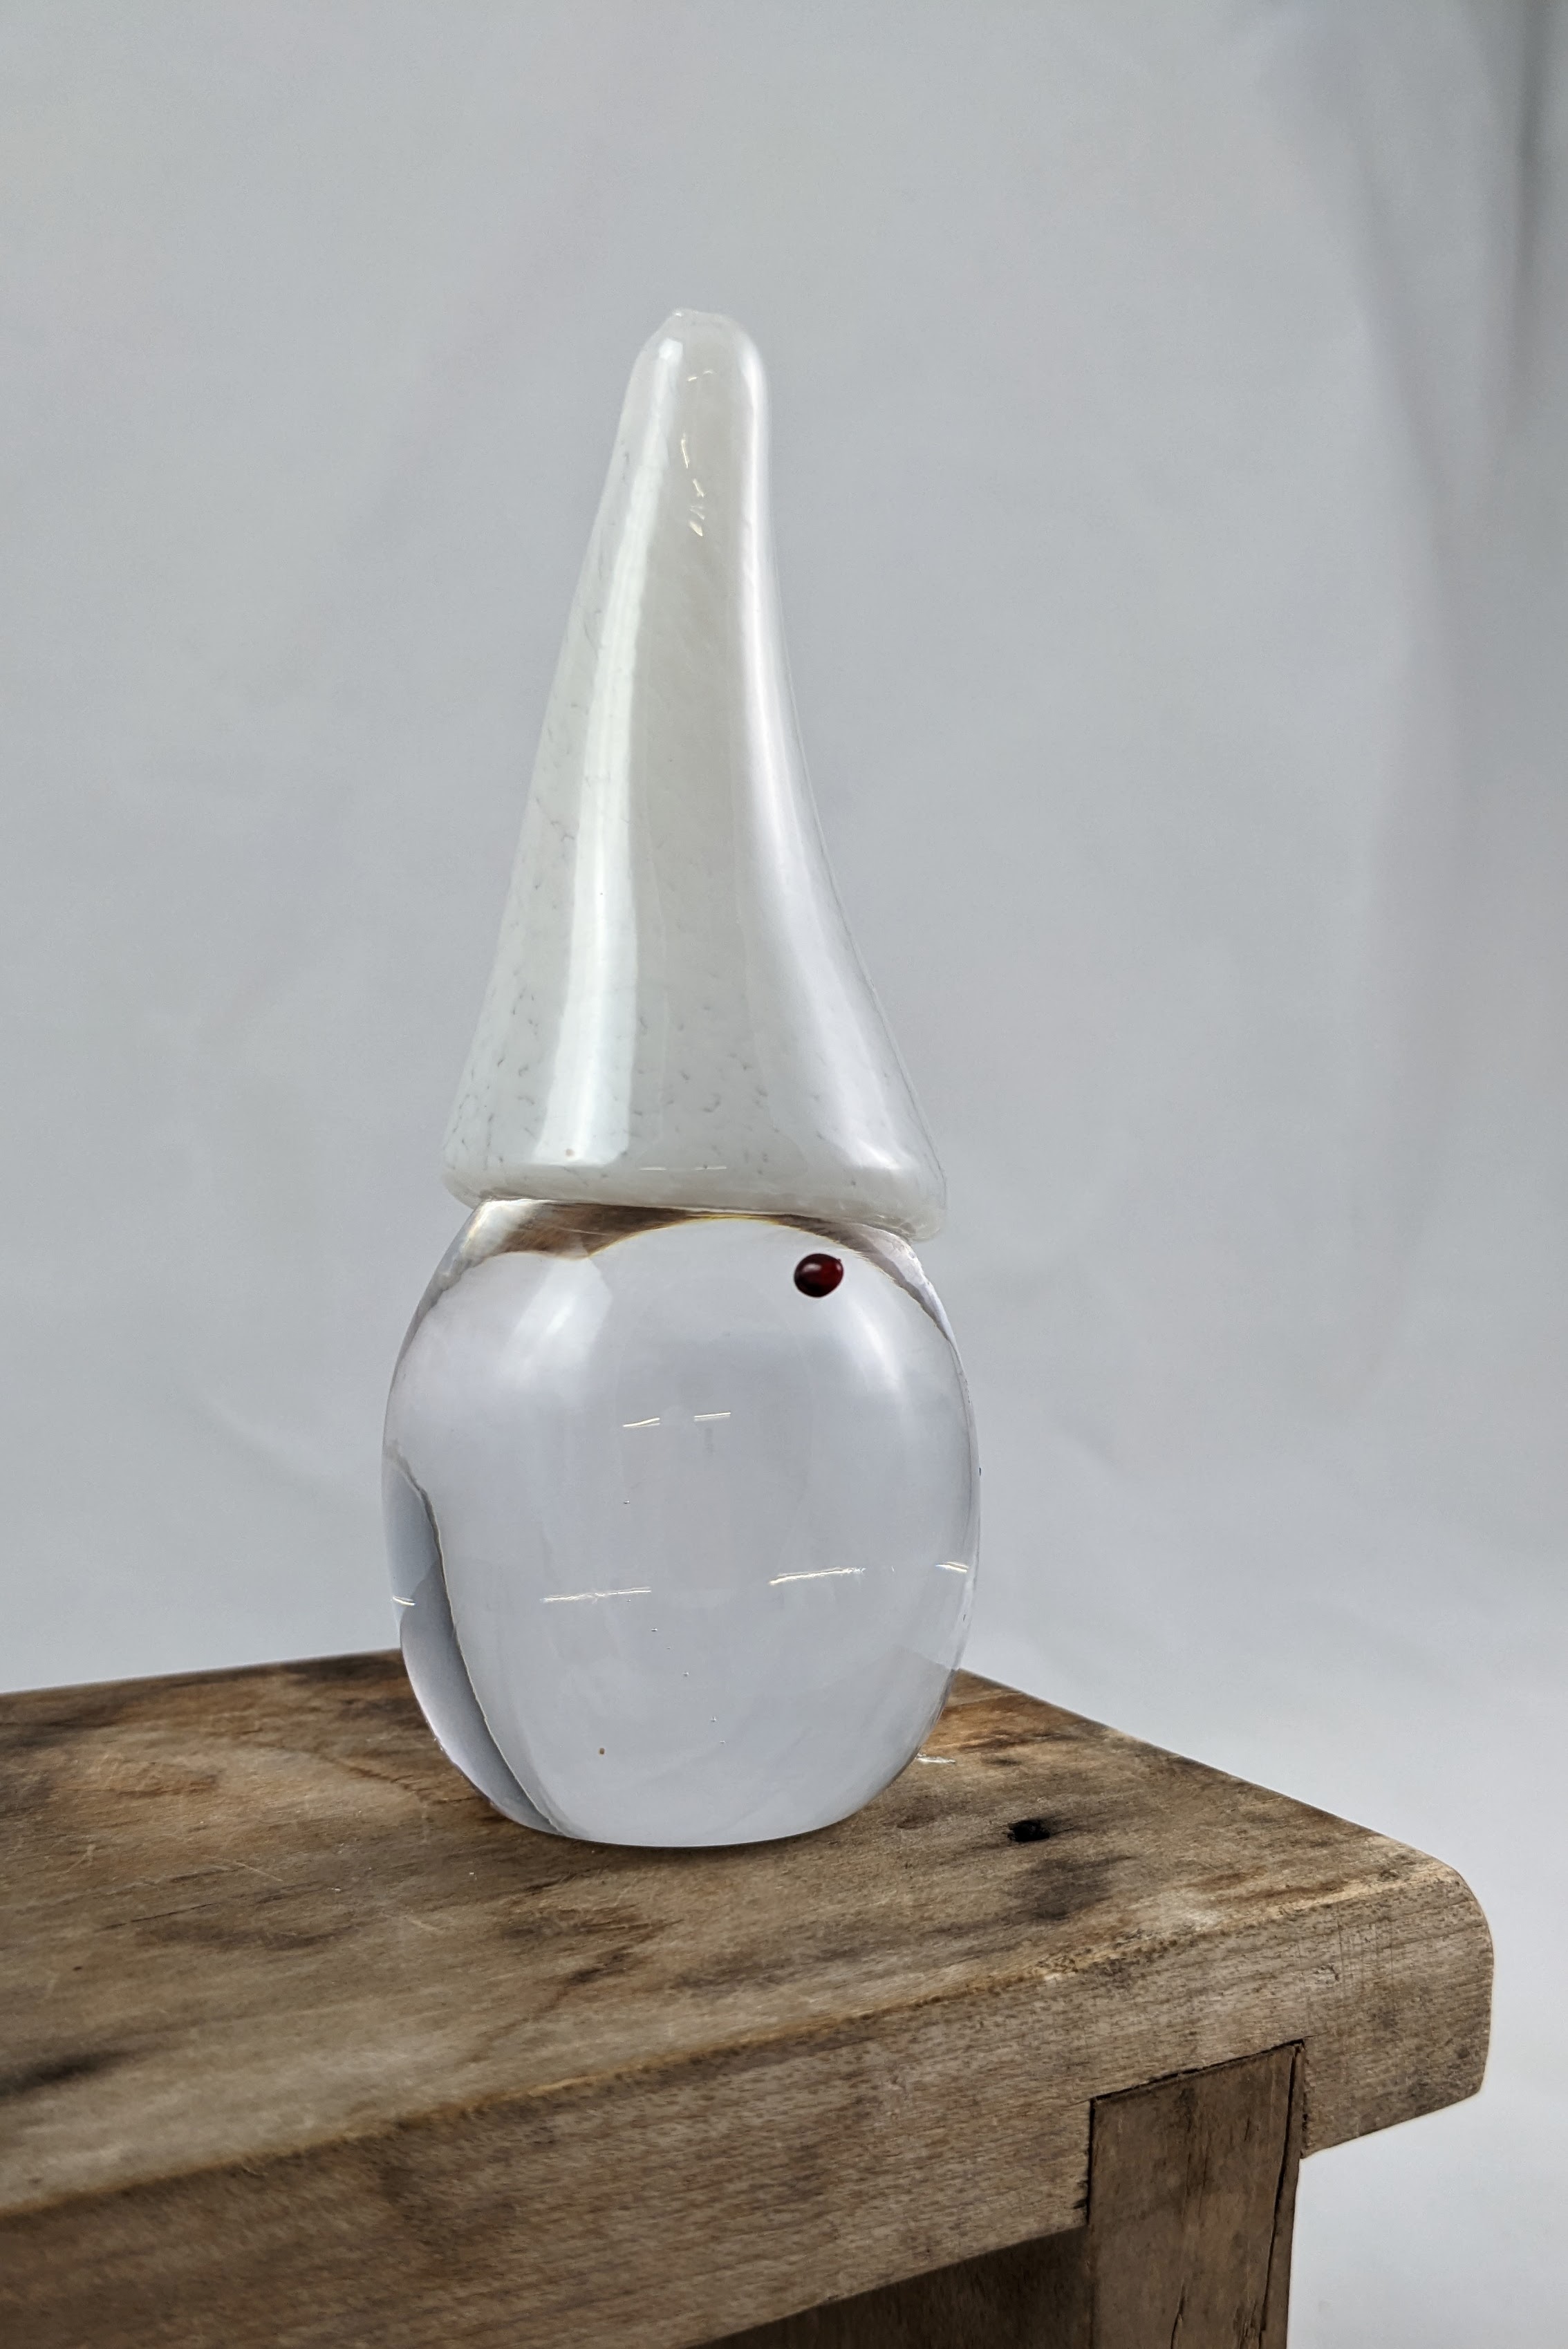 glass tomte with a clear body and red nose, cream colored hat. 